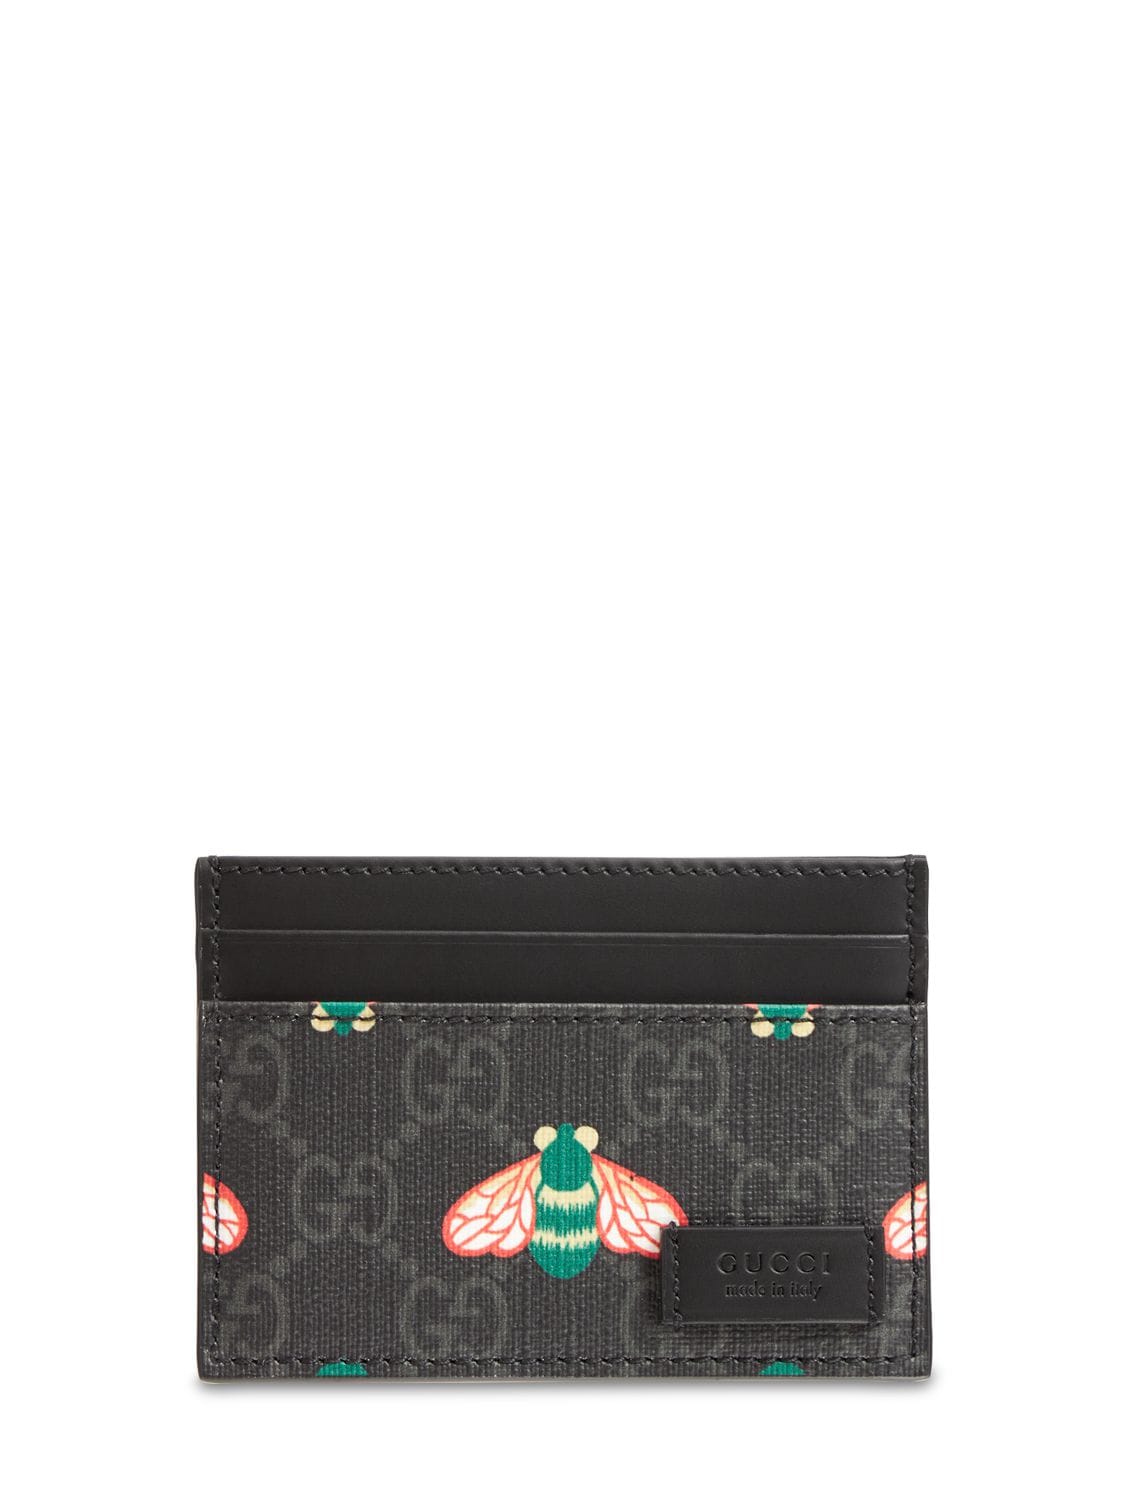 Porte-cartes Gucci Bestiary Bees